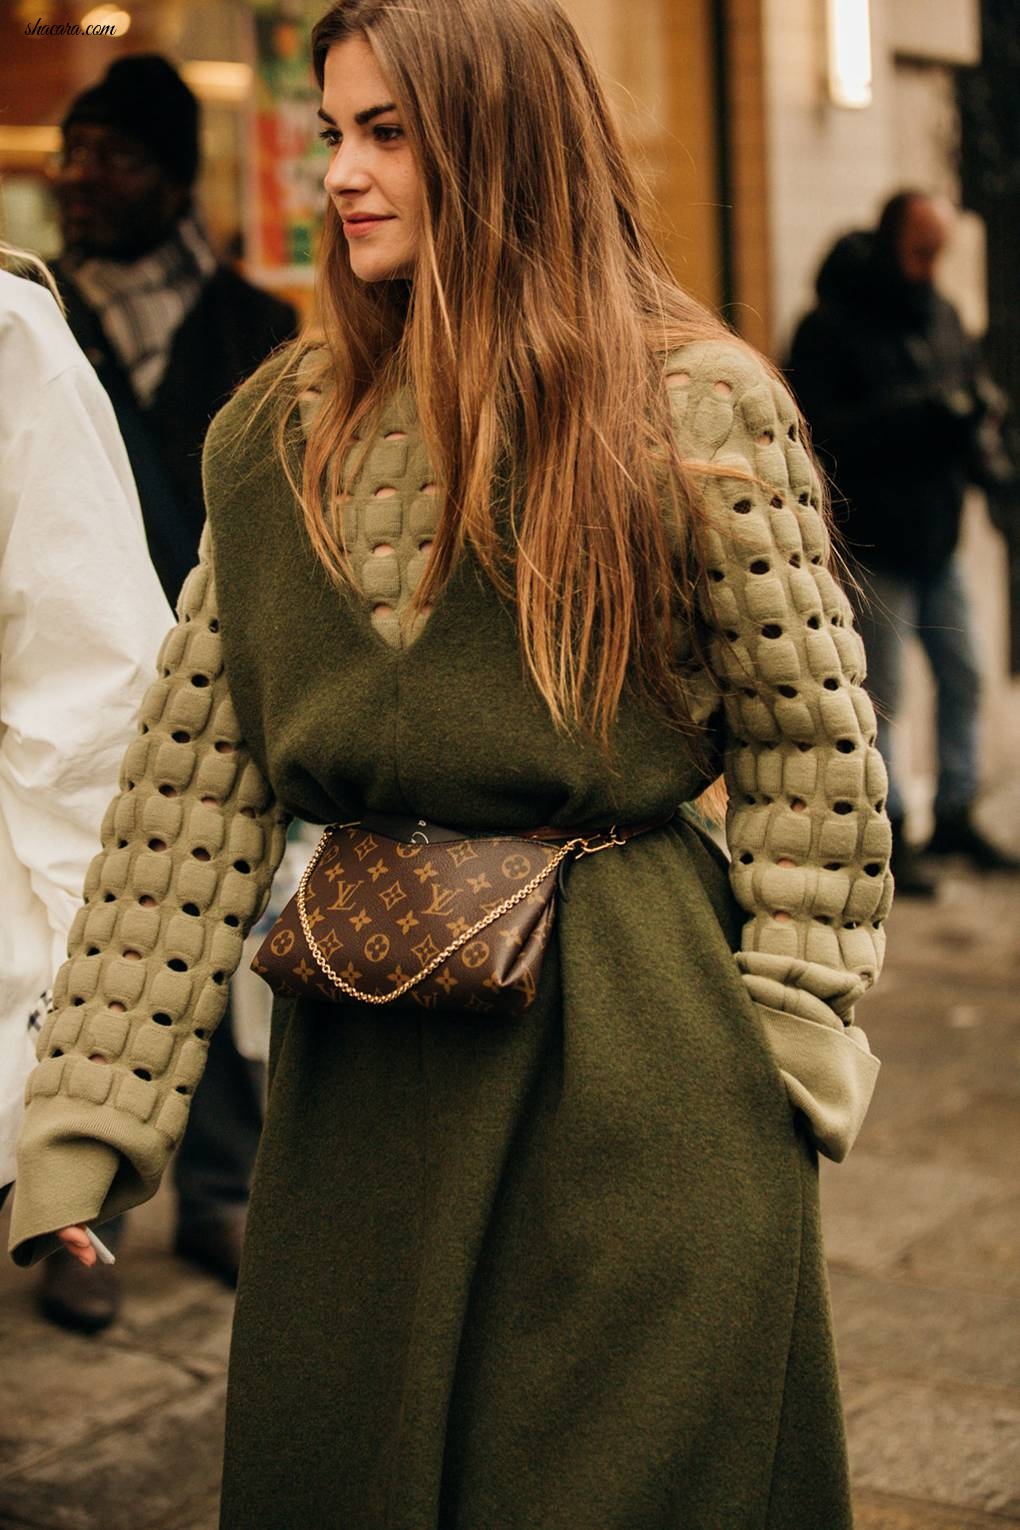 THE BEST STREET STYLE FROM COUTURE FASHION WEEK PART 6